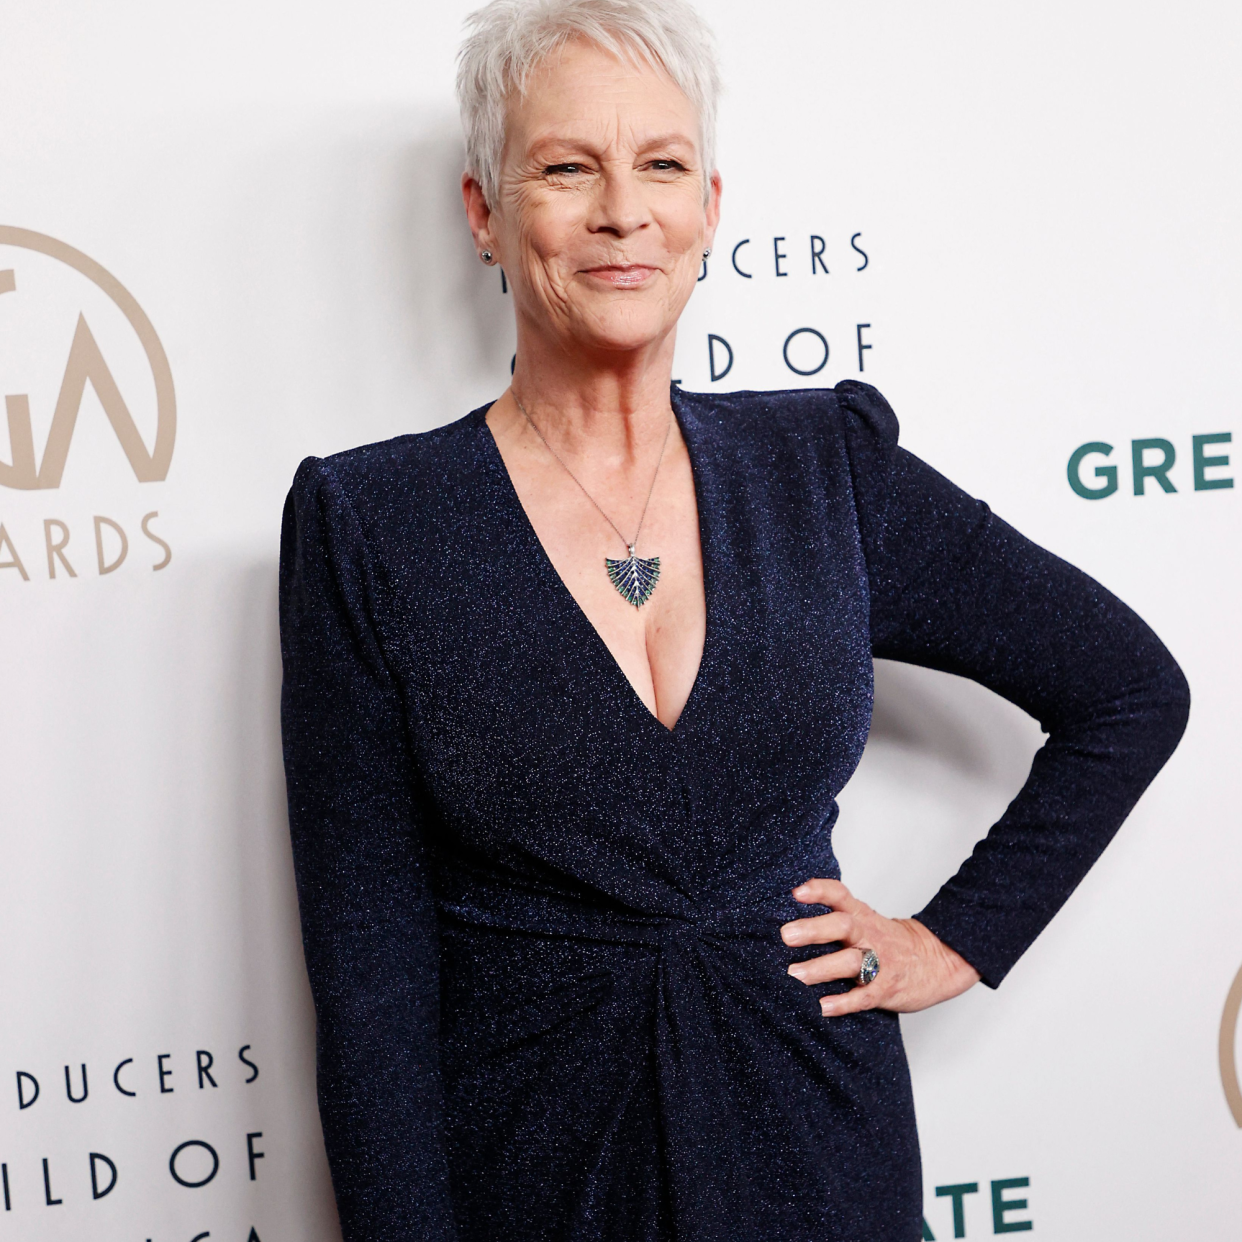  US actress Jamie Lee Curtis arrives for the 34th Annual Producers Guild Awards (PGA) at the Beverly Hilton in Beverly Hills, California on February 25, 2023 